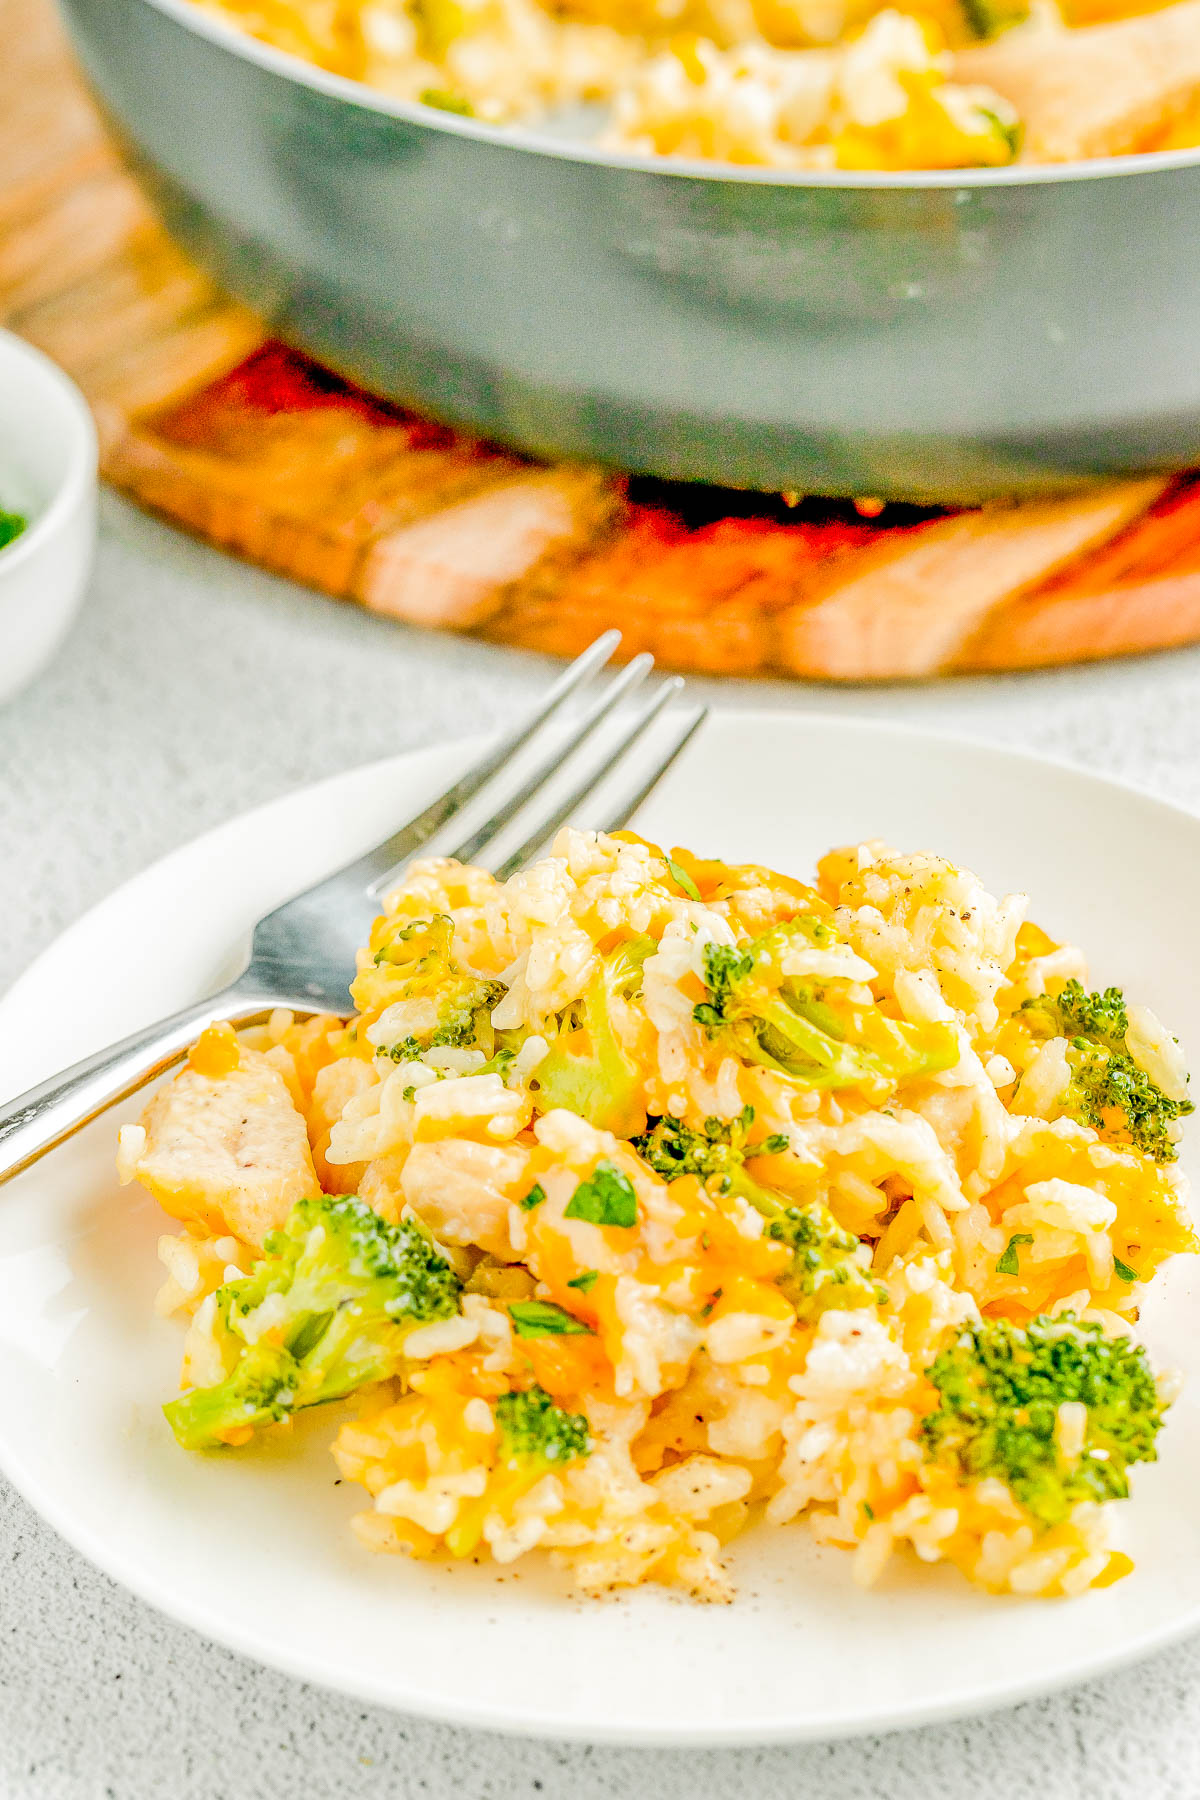 30-Minute Chicken Broccoli and Rice Casserole — This casserole is quick, EASY, and made in one skillet on your stove! No baking required. This recipe is a meal-in-one with protein, veggies, and carbs and is ready in just 30 minutes! It’s perfect for busy weeknights and can be CUSTOMIZED using whatever veggies you have on hand! 